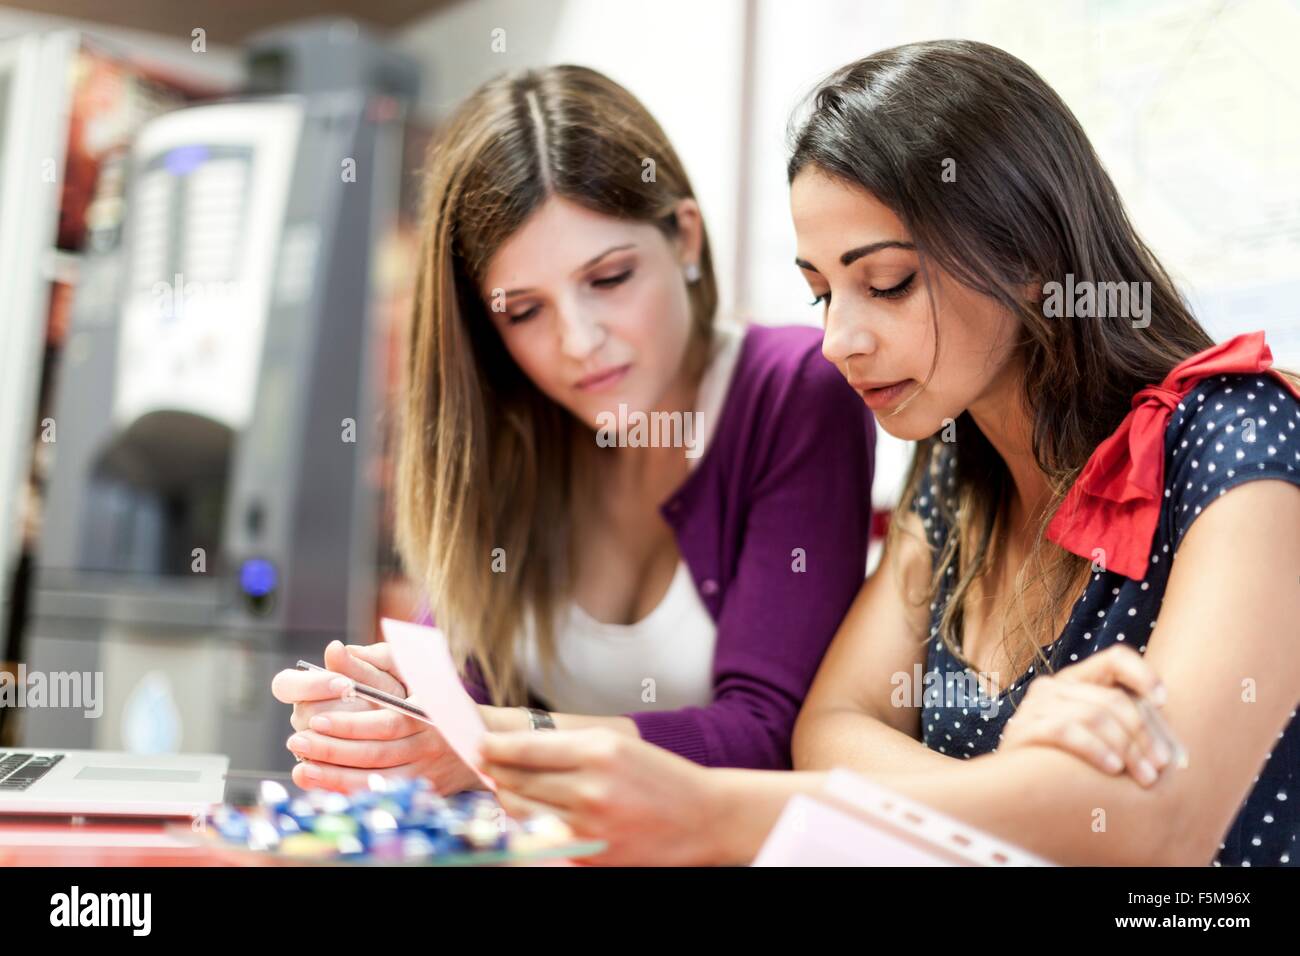 Two young women sitting together, studying Stock Photo